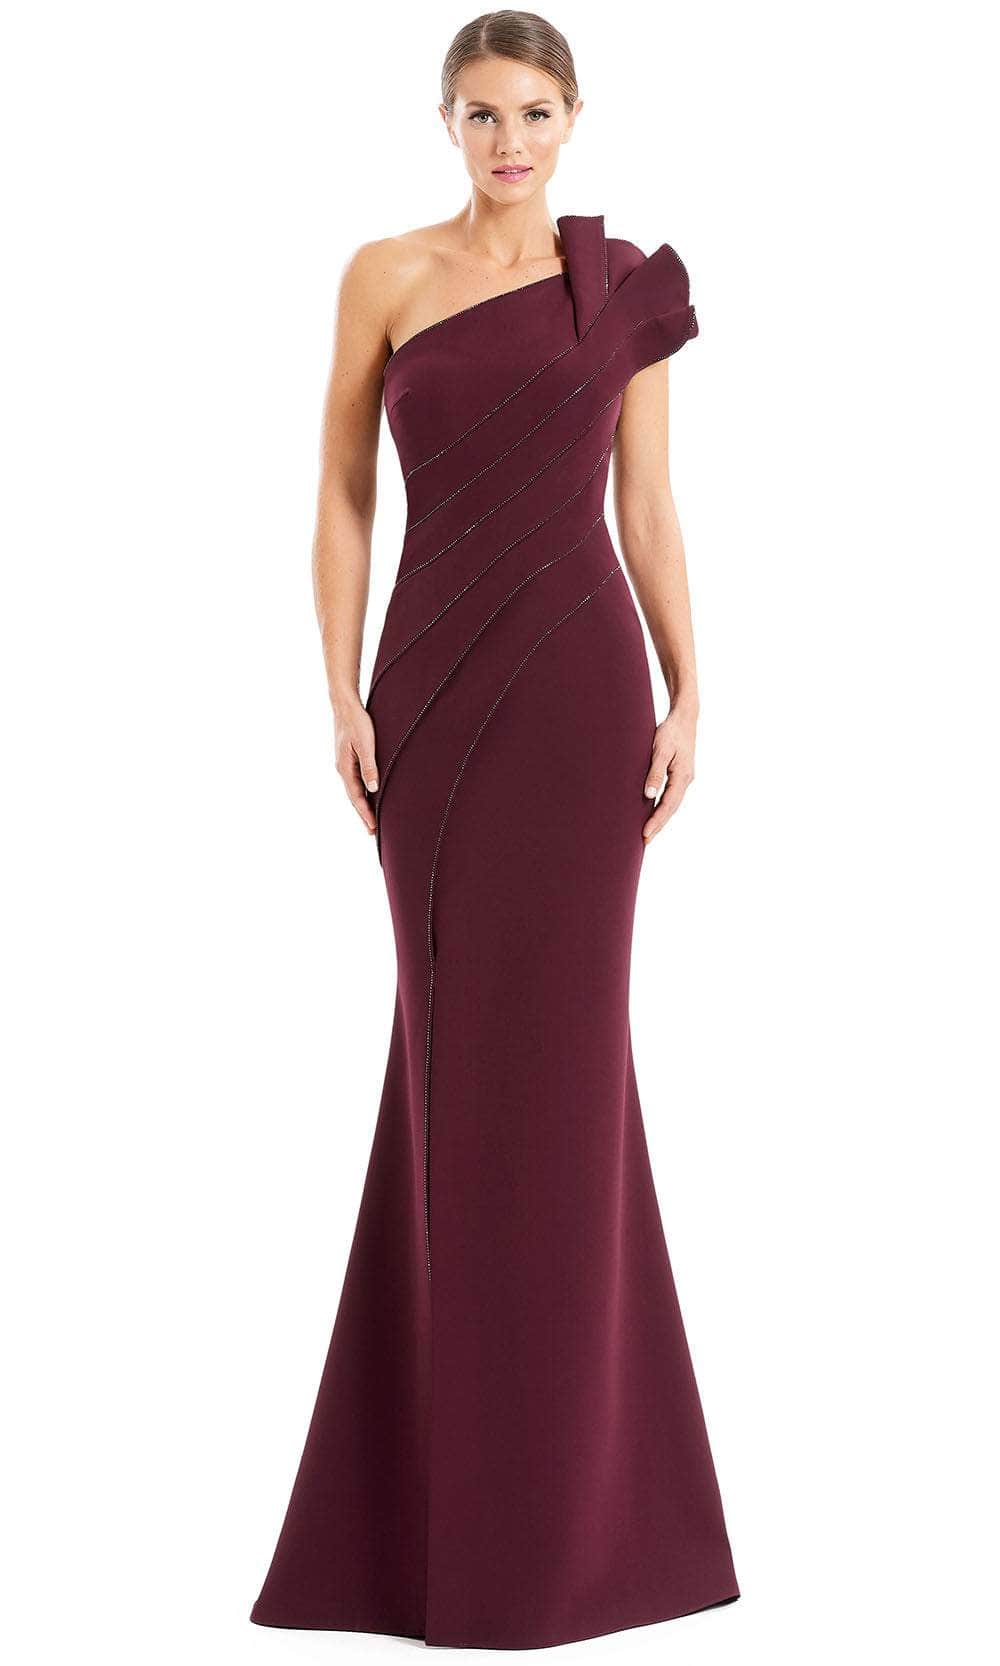 Alexander by Daymor 1671 - Pleated Asymmetric Neck Evening Gown
